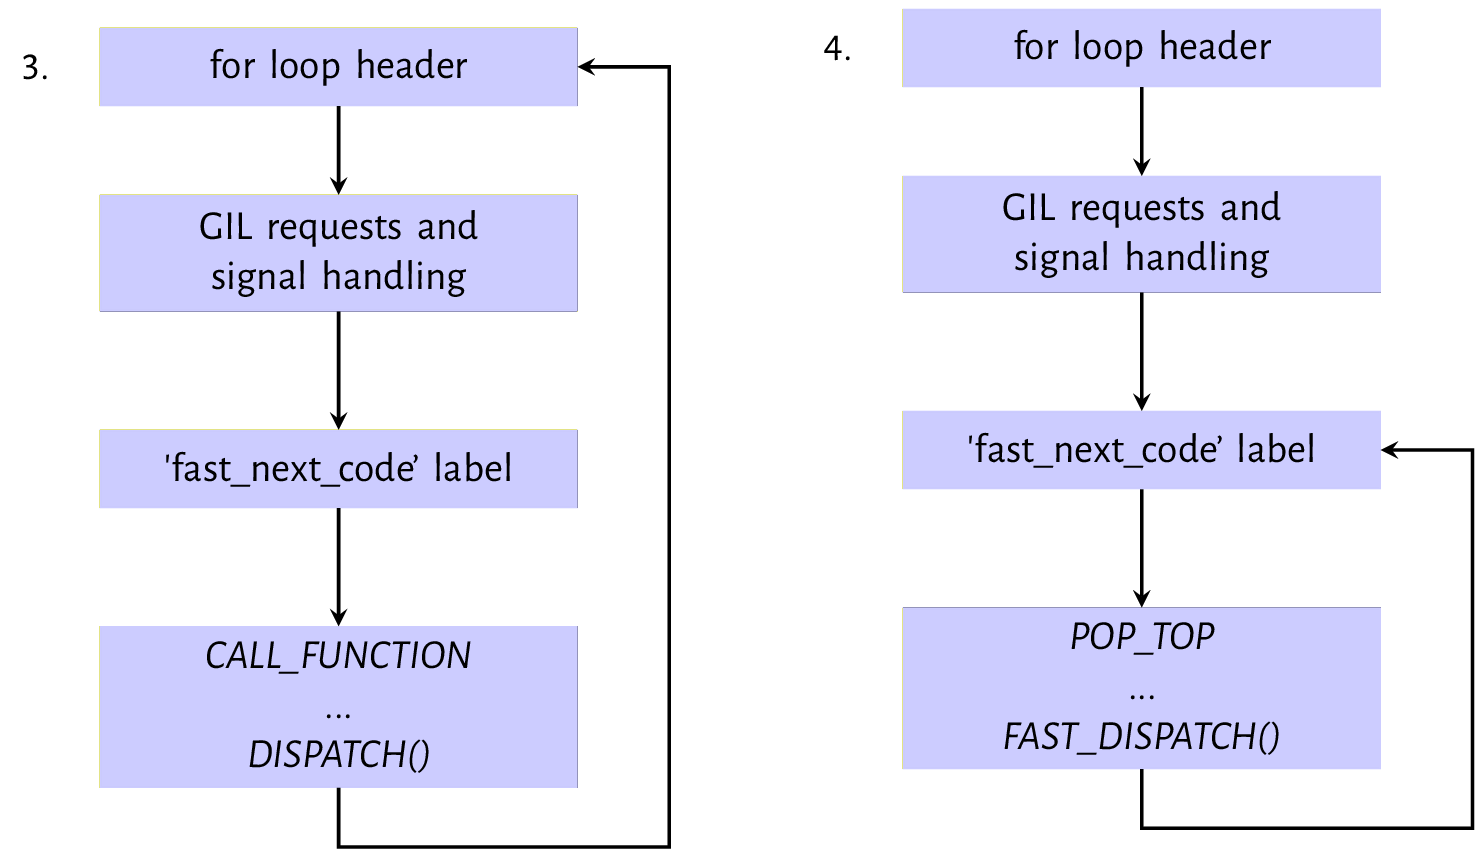 Figure 9.2: Evaluation path for `CALL_FUNCTION` and `POP_TOP` instruction